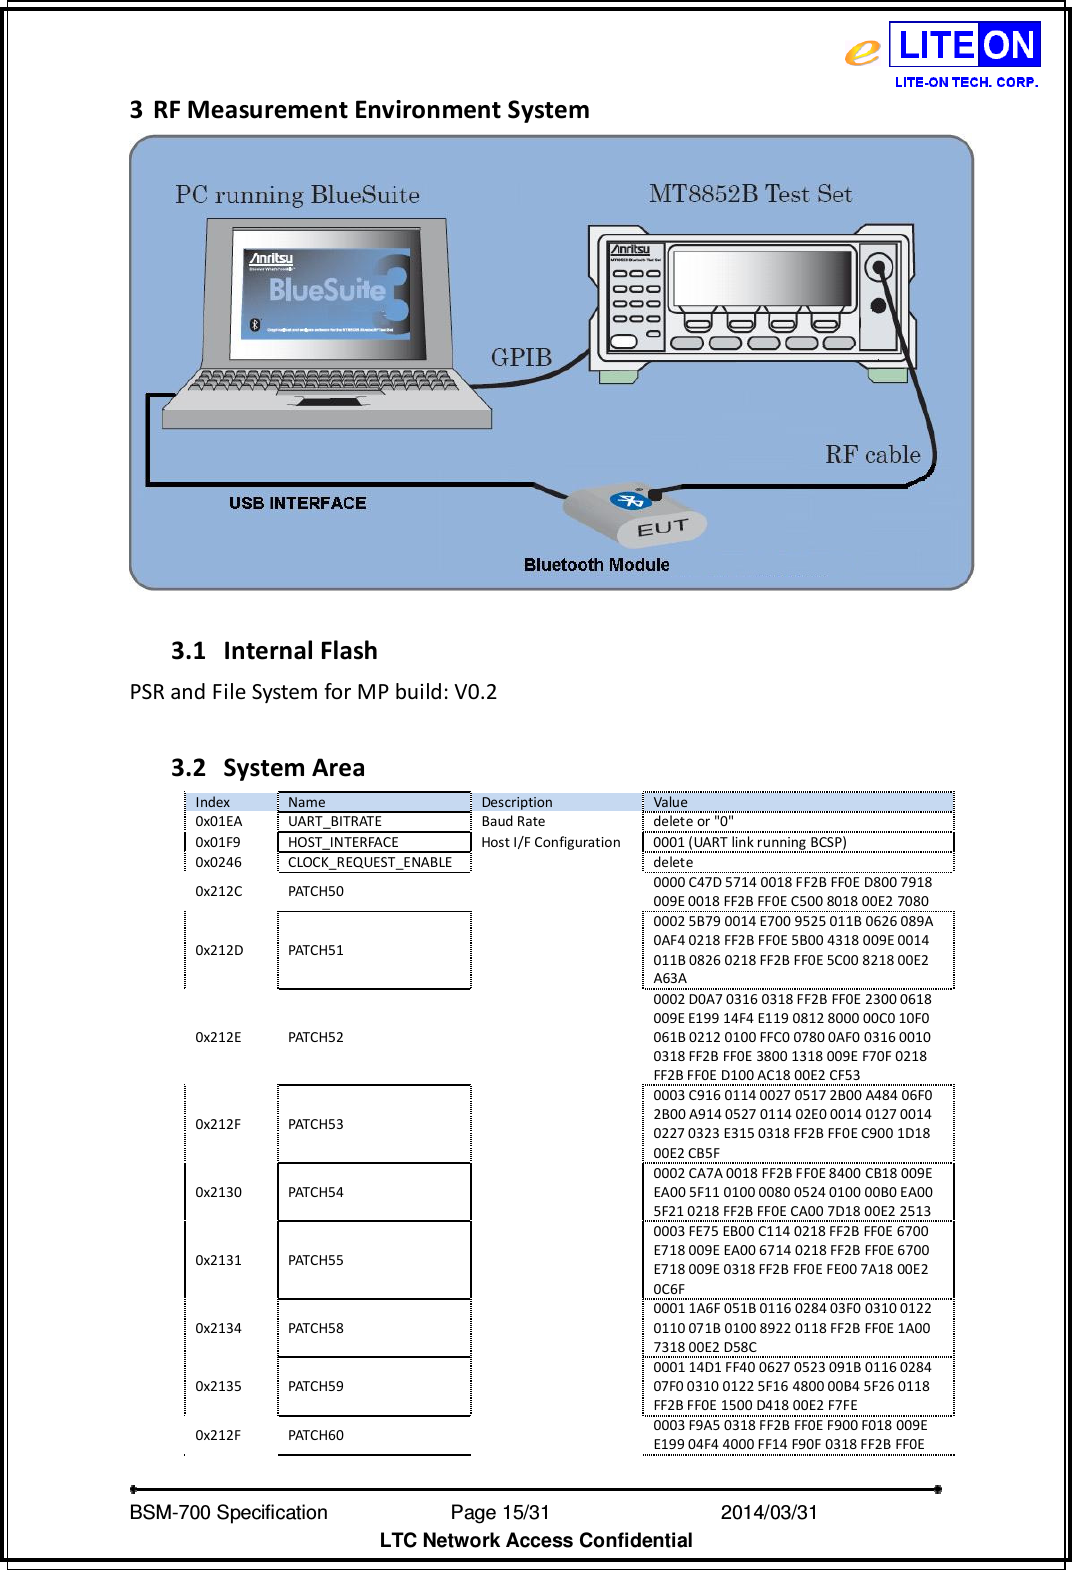   BSM-700 Specification                Page 15/31                           2014/03/31 LTC Network Access Confidential 3 RF Measurement Environment System   3.1 Internal Flash   PSR and File System for MP build: V0.2  3.2 System Area Index Name Description Value 0x01EA  UART_BITRATE  Baud Rate  delete or &quot;0&quot; 0x01F9  HOST_INTERFACE  Host I/F Configuration  0001 (UART link running BCSP) 0x0246  CLOCK_REQUEST_ENABLE    delete 0x212C  PATCH50    0000 C47D 5714 0018 FF2B FF0E D800 7918 009E 0018 FF2B FF0E C500 8018 00E2 7080 0x212D  PATCH51   0002 5B79 0014 E700 9525 011B 0626 089A 0AF4 0218 FF2B FF0E 5B00 4318 009E 0014 011B 0826 0218 FF2B FF0E 5C00 8218 00E2 A63A 0x212E  PATCH52   0002 D0A7 0316 0318 FF2B FF0E 2300 0618 009E E199 14F4 E119 0812 8000 00C0 10F0 061B 0212 0100 FFC0 0780 0AF0 0316 0010 0318 FF2B FF0E 3800 1318 009E F70F 0218 FF2B FF0E D100 AC18 00E2 CF53 0x212F  PATCH53   0003 C916 0114 0027 0517 2B00 A484 06F0 2B00 A914 0527 0114 02E0 0014 0127 0014 0227 0323 E315 0318 FF2B FF0E C900 1D18 00E2 CB5F 0x2130  PATCH54   0002 CA7A 0018 FF2B FF0E 8400 CB18 009E EA00 5F11 0100 0080 0524 0100 00B0 EA00 5F21 0218 FF2B FF0E CA00 7D18 00E2 2513 0x2131  PATCH55   0003 FE75 EB00 C114 0218 FF2B FF0E 6700 E718 009E EA00 6714 0218 FF2B FF0E 6700 E718 009E 0318 FF2B FF0E FE00 7A18 00E2 0C6F 0x2134  PATCH58   0001 1A6F 051B 0116 0284 03F0 0310 0122 0110 071B 0100 8922 0118 FF2B FF0E 1A00 7318 00E2 D58C 0x2135  PATCH59   0001 14D1 FF40 0627 0523 091B 0116 0284 07F0 0310 0122 5F16 4800 00B4 5F26 0118 FF2B FF0E 1500 D418 00E2 F7FE 0x212F  PATCH60    0003 F9A5 0318 FF2B FF0E F900 F018 009E E199 04F4 4000 FF14 F90F 0318 FF2B FF0E 